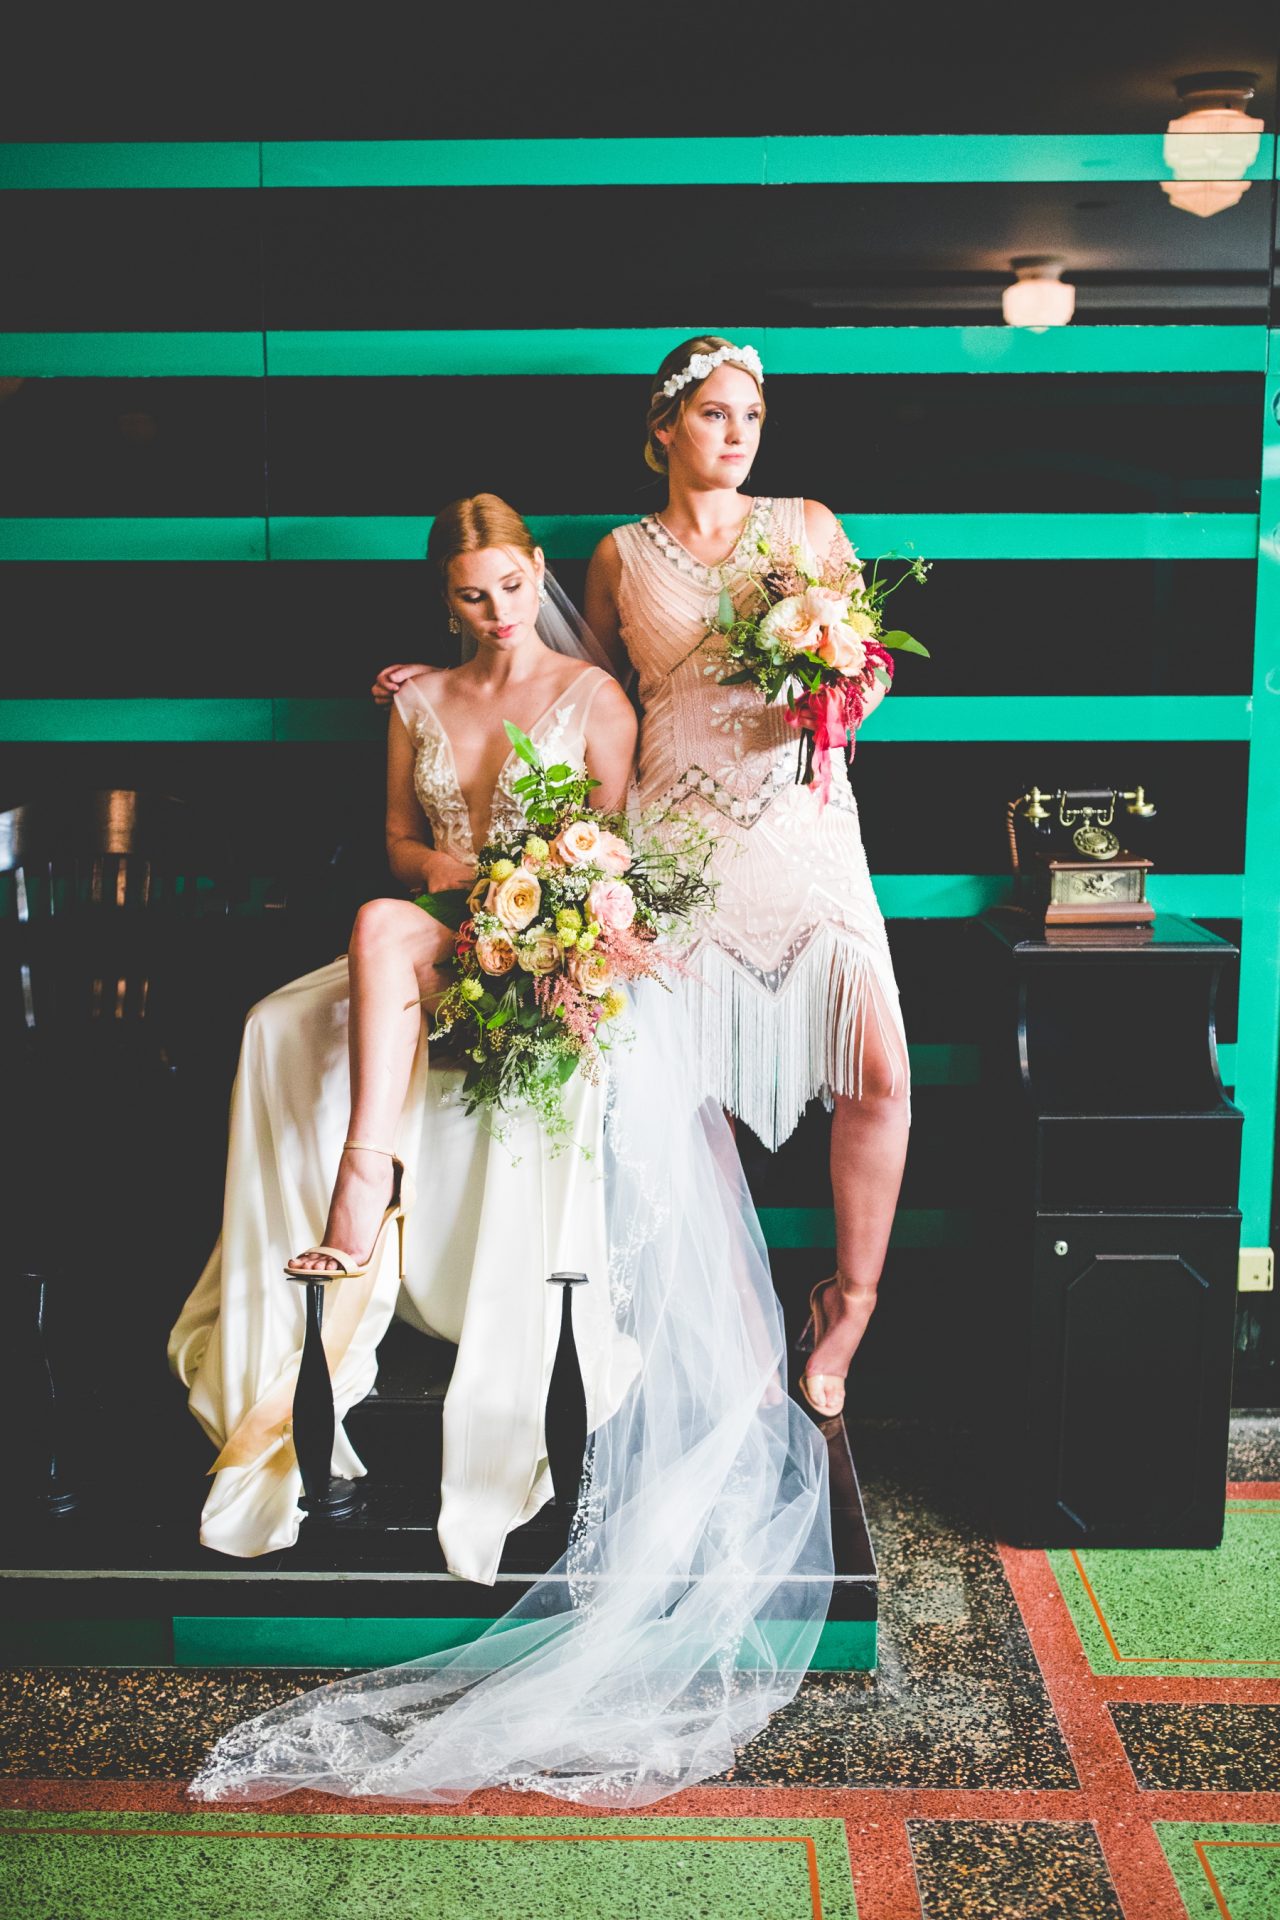 Vintage Bride and Bridesmaid Photos at the Hermitage Hotel, Southern Wedding Photographer Lissa Chandler